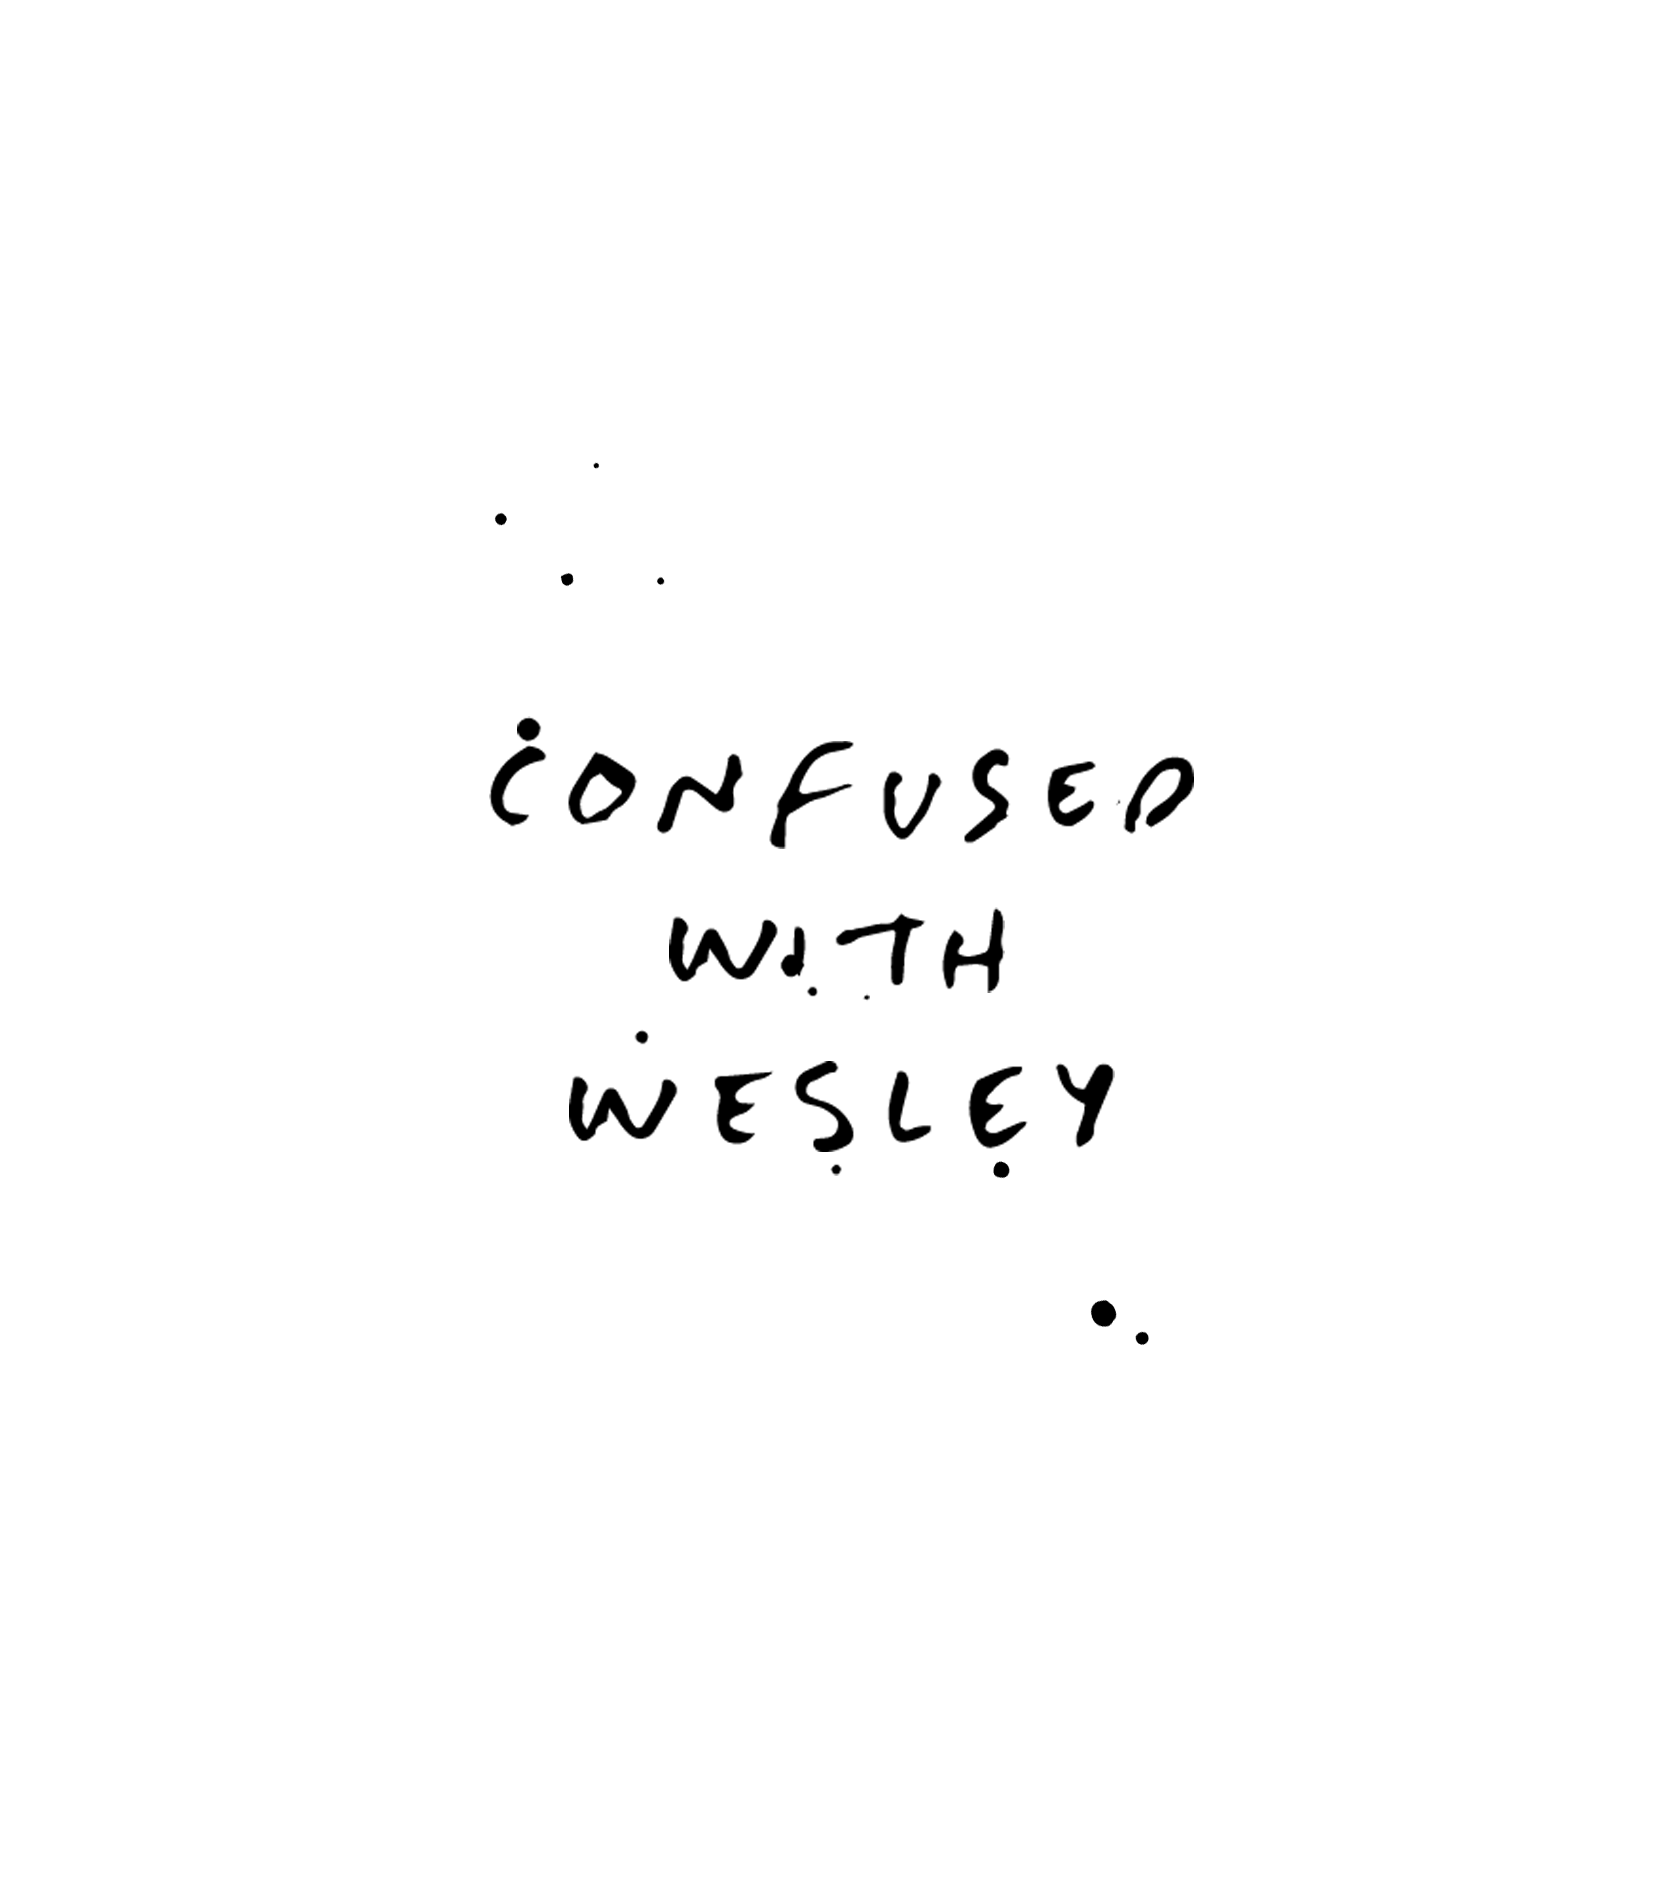 Confused with Wesley